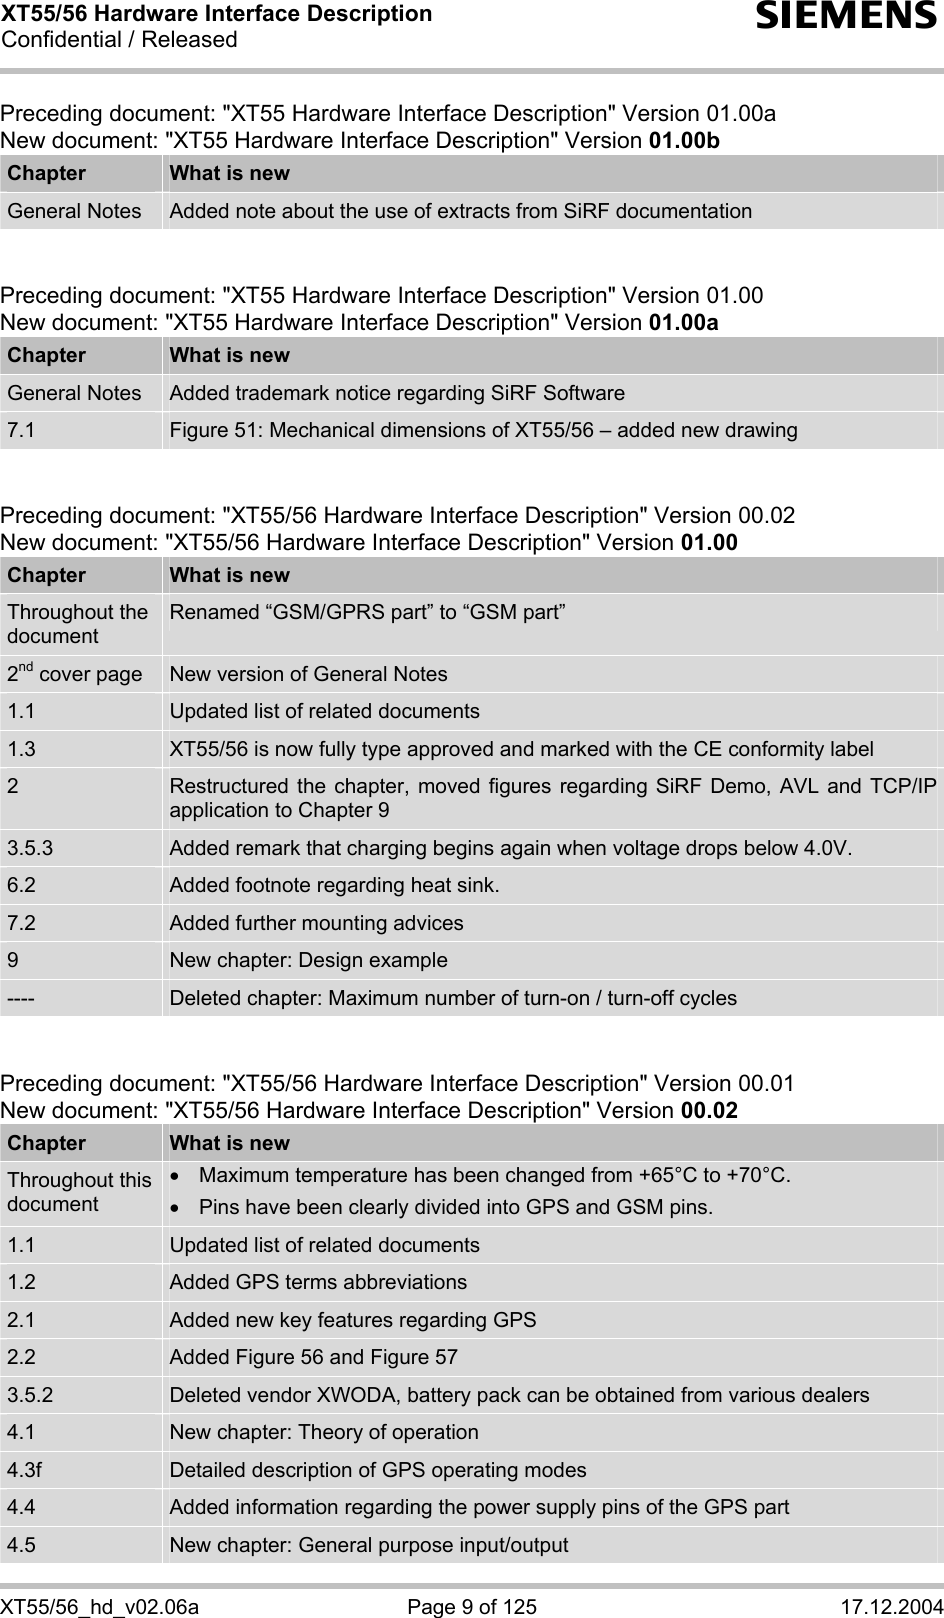 XT55/56 Hardware Interface Description Confidential / Released s XT55/56_hd_v02.06a  Page 9 of 125  17.12.2004 Preceding document: &quot;XT55 Hardware Interface Description&quot; Version 01.00a New document: &quot;XT55 Hardware Interface Description&quot; Version 01.00b Chapter  What is new General Notes  Added note about the use of extracts from SiRF documentation   Preceding document: &quot;XT55 Hardware Interface Description&quot; Version 01.00 New document: &quot;XT55 Hardware Interface Description&quot; Version 01.00a Chapter  What is new General Notes  Added trademark notice regarding SiRF Software 7.1  Figure 51: Mechanical dimensions of XT55/56 – added new drawing   Preceding document: &quot;XT55/56 Hardware Interface Description&quot; Version 00.02 New document: &quot;XT55/56 Hardware Interface Description&quot; Version 01.00 Chapter  What is new Throughout the document Renamed “GSM/GPRS part” to “GSM part” 2nd cover page  New version of General Notes 1.1  Updated list of related documents 1.3  XT55/56 is now fully type approved and marked with the CE conformity label 2  Restructured the chapter, moved figures regarding SiRF Demo, AVL and TCP/IP application to Chapter 9 3.5.3  Added remark that charging begins again when voltage drops below 4.0V. 6.2  Added footnote regarding heat sink. 7.2  Added further mounting advices 9  New chapter: Design example ----  Deleted chapter: Maximum number of turn-on / turn-off cycles   Preceding document: &quot;XT55/56 Hardware Interface Description&quot; Version 00.01 New document: &quot;XT55/56 Hardware Interface Description&quot; Version 00.02 Chapter  What is new Throughout this document •  Maximum temperature has been changed from +65°C to +70°C. •  Pins have been clearly divided into GPS and GSM pins. 1.1  Updated list of related documents 1.2  Added GPS terms abbreviations 2.1  Added new key features regarding GPS 2.2  Added Figure 56 and Figure 57  3.5.2  Deleted vendor XWODA, battery pack can be obtained from various dealers 4.1  New chapter: Theory of operation 4.3f  Detailed description of GPS operating modes 4.4  Added information regarding the power supply pins of the GPS part 4.5  New chapter: General purpose input/output 